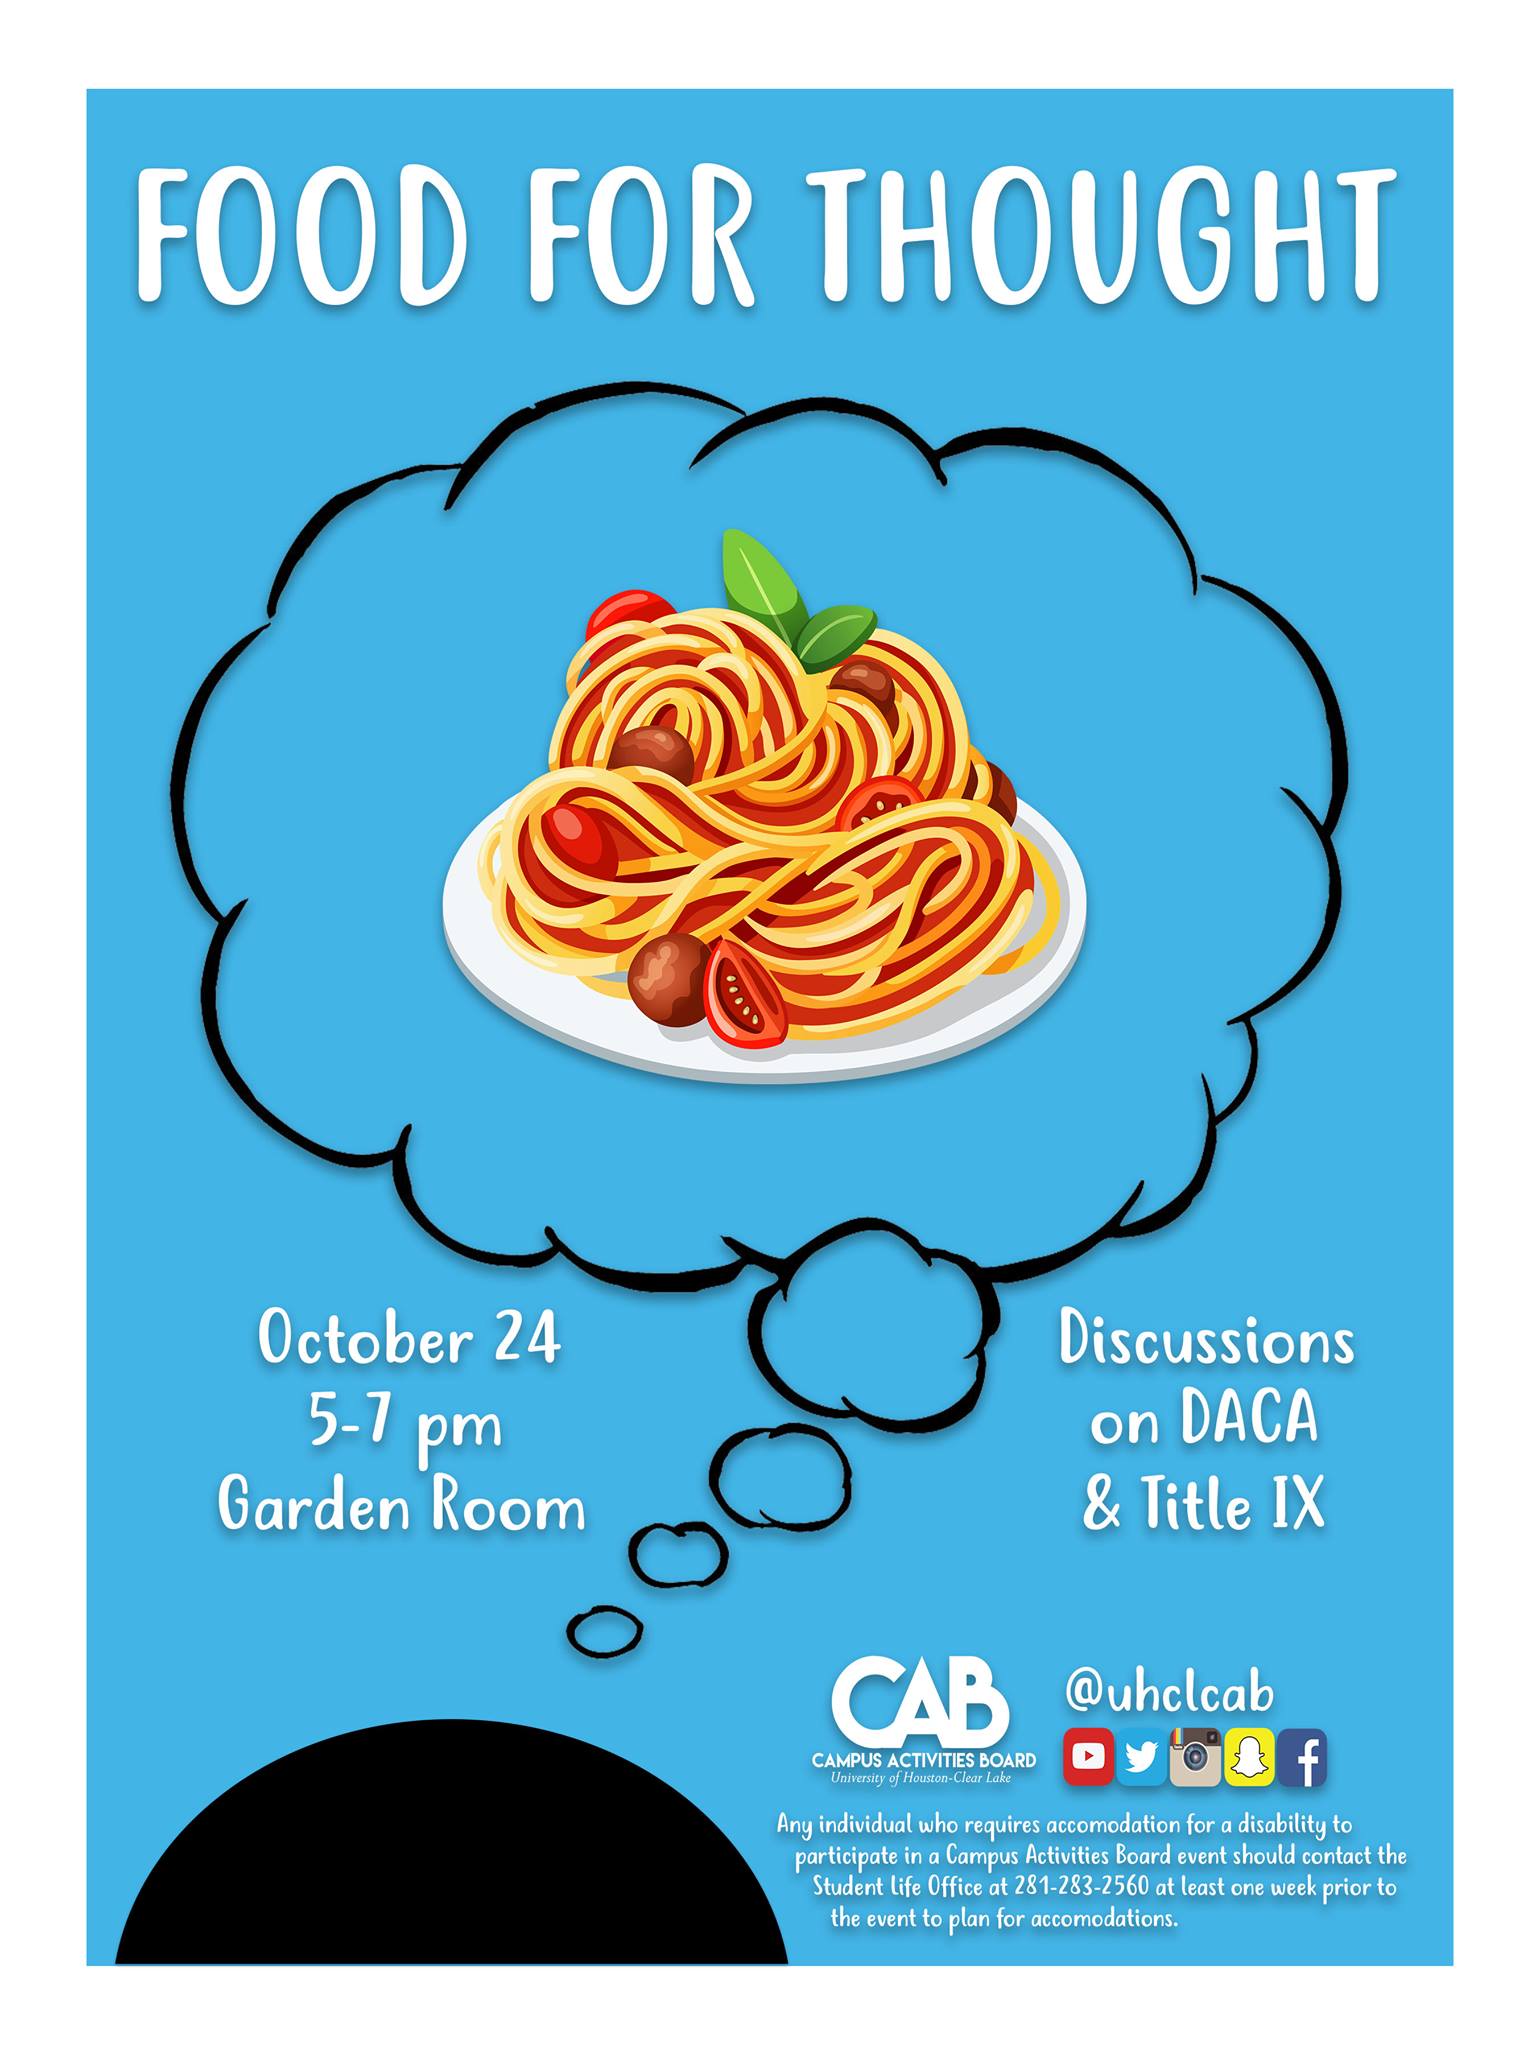 GRAPHIC: Food for Thought flyer. Flyer courtesy of Campus Activities Board.